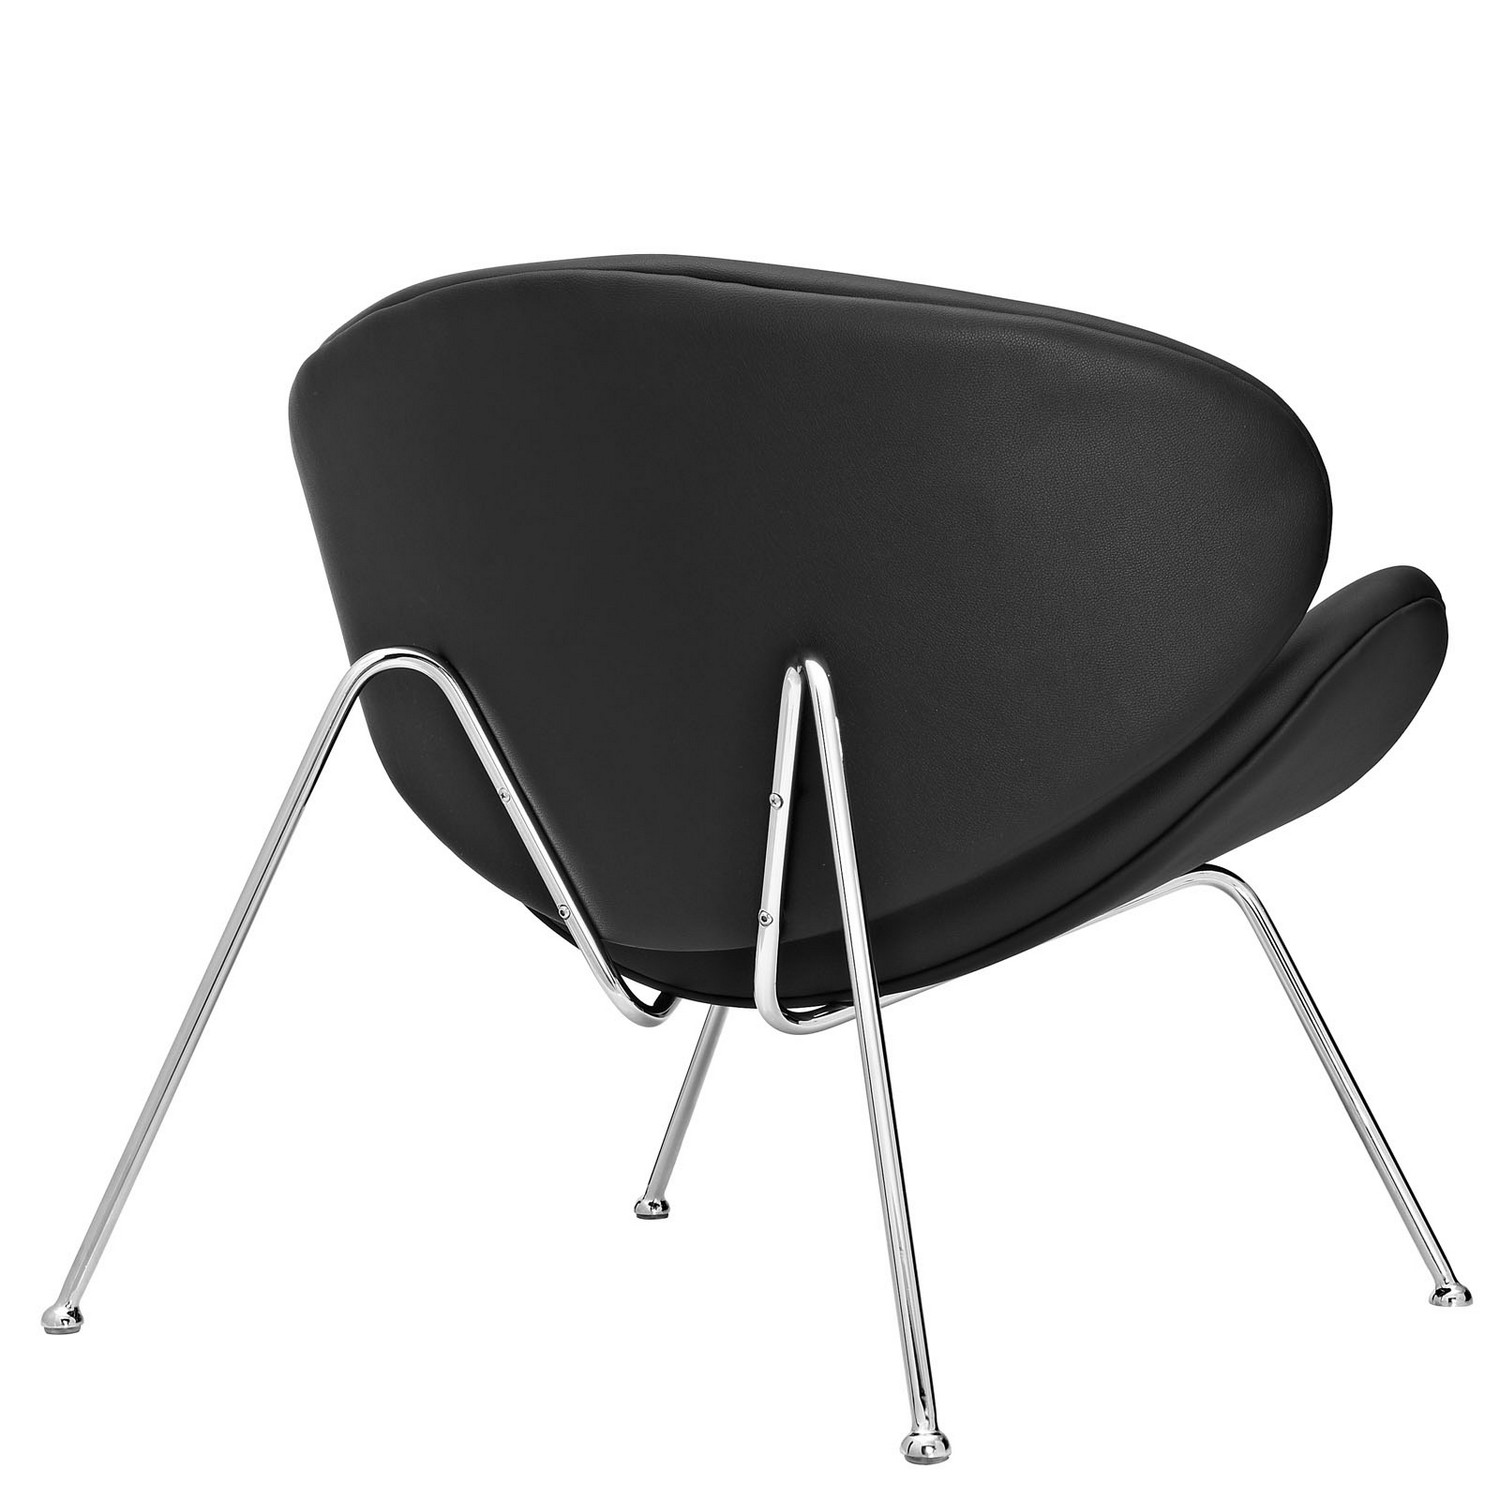 Modway Nutshell Lounge Chair - Black